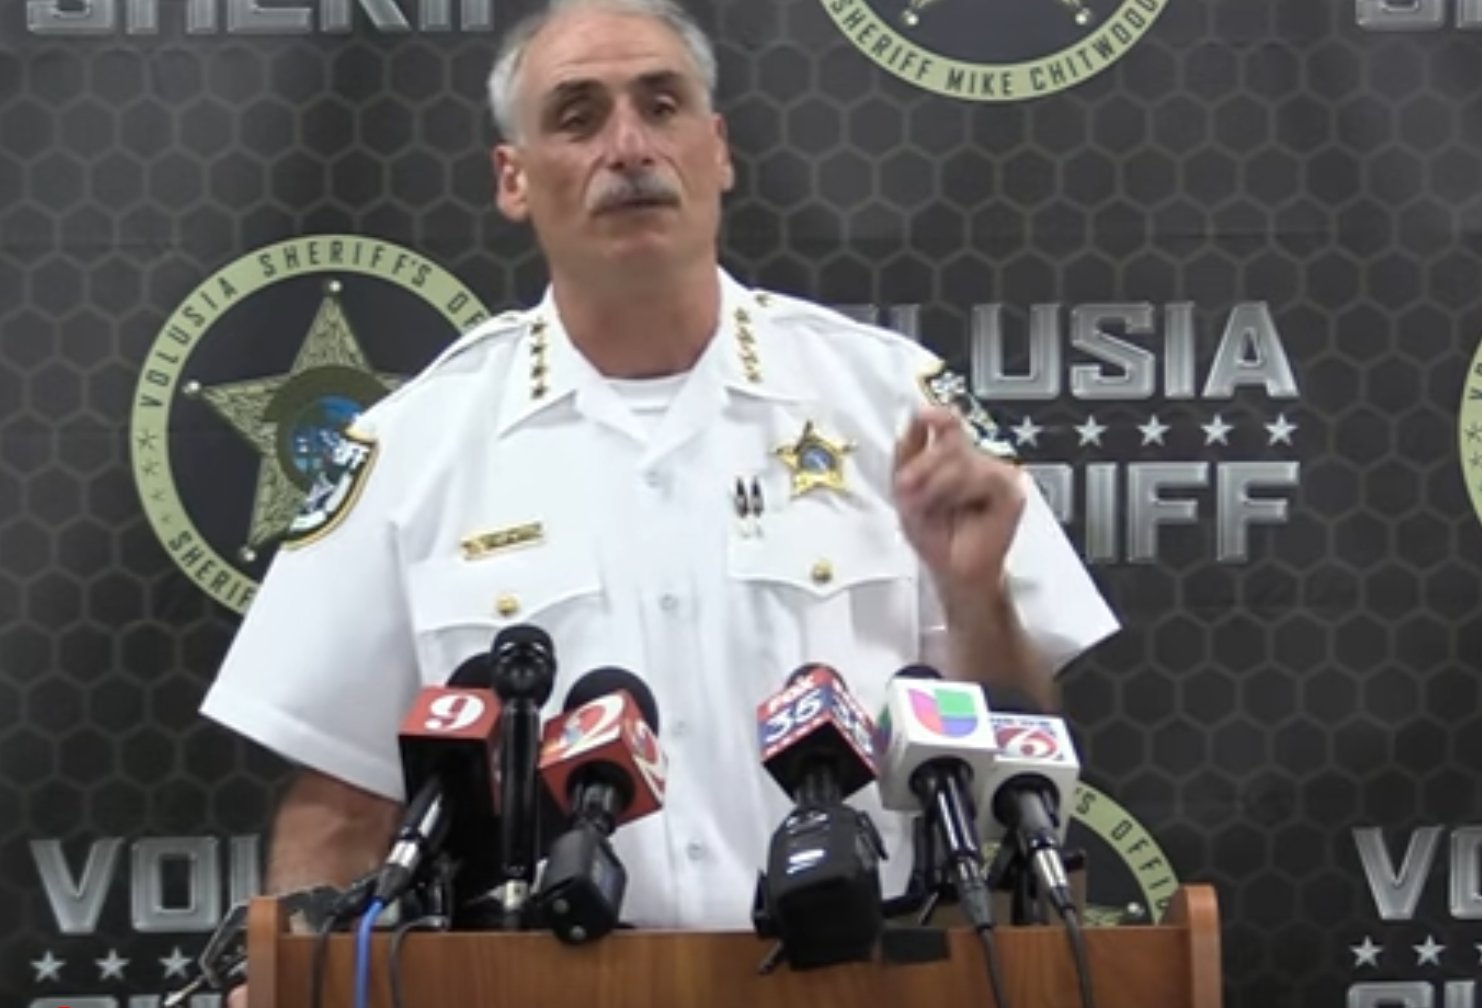 Sheriff Mike Chitwood Condemns Anti-Semitic Activity in Volusia County